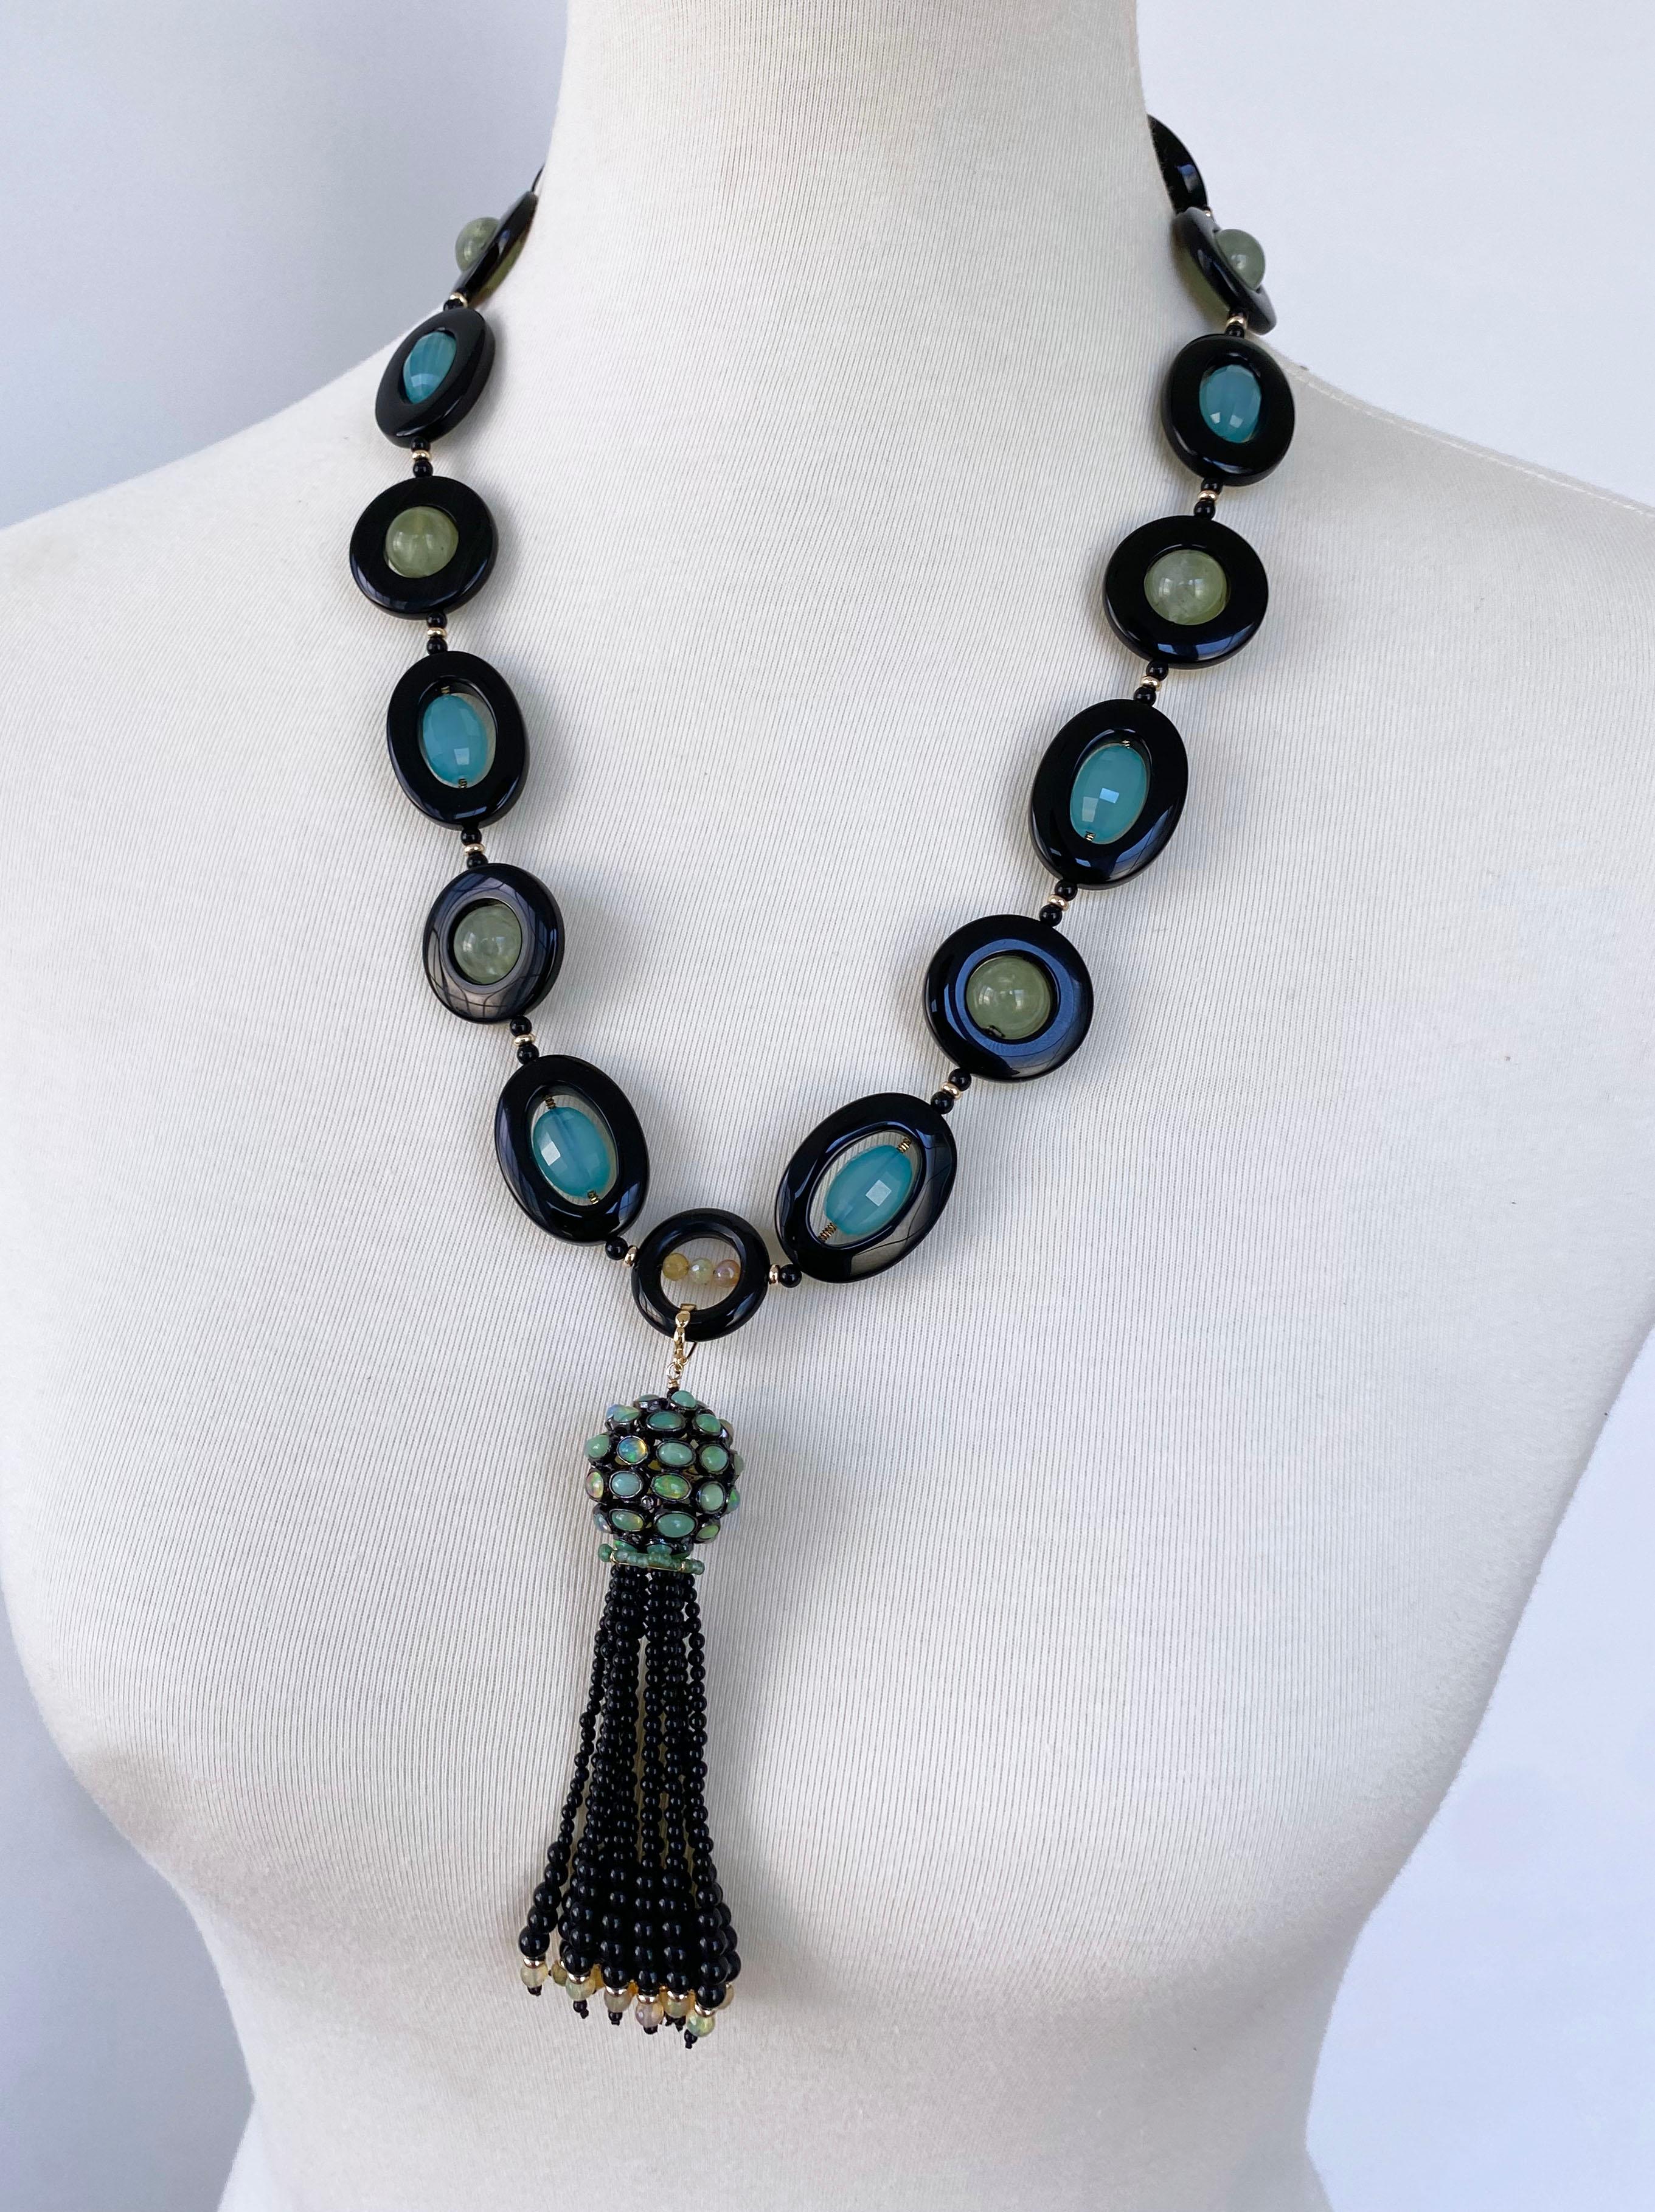 Artisan Marina J. Unique Fire Opal, Onyx, Chalcedony & Solid 14k Gold Tassel Necklace For Sale